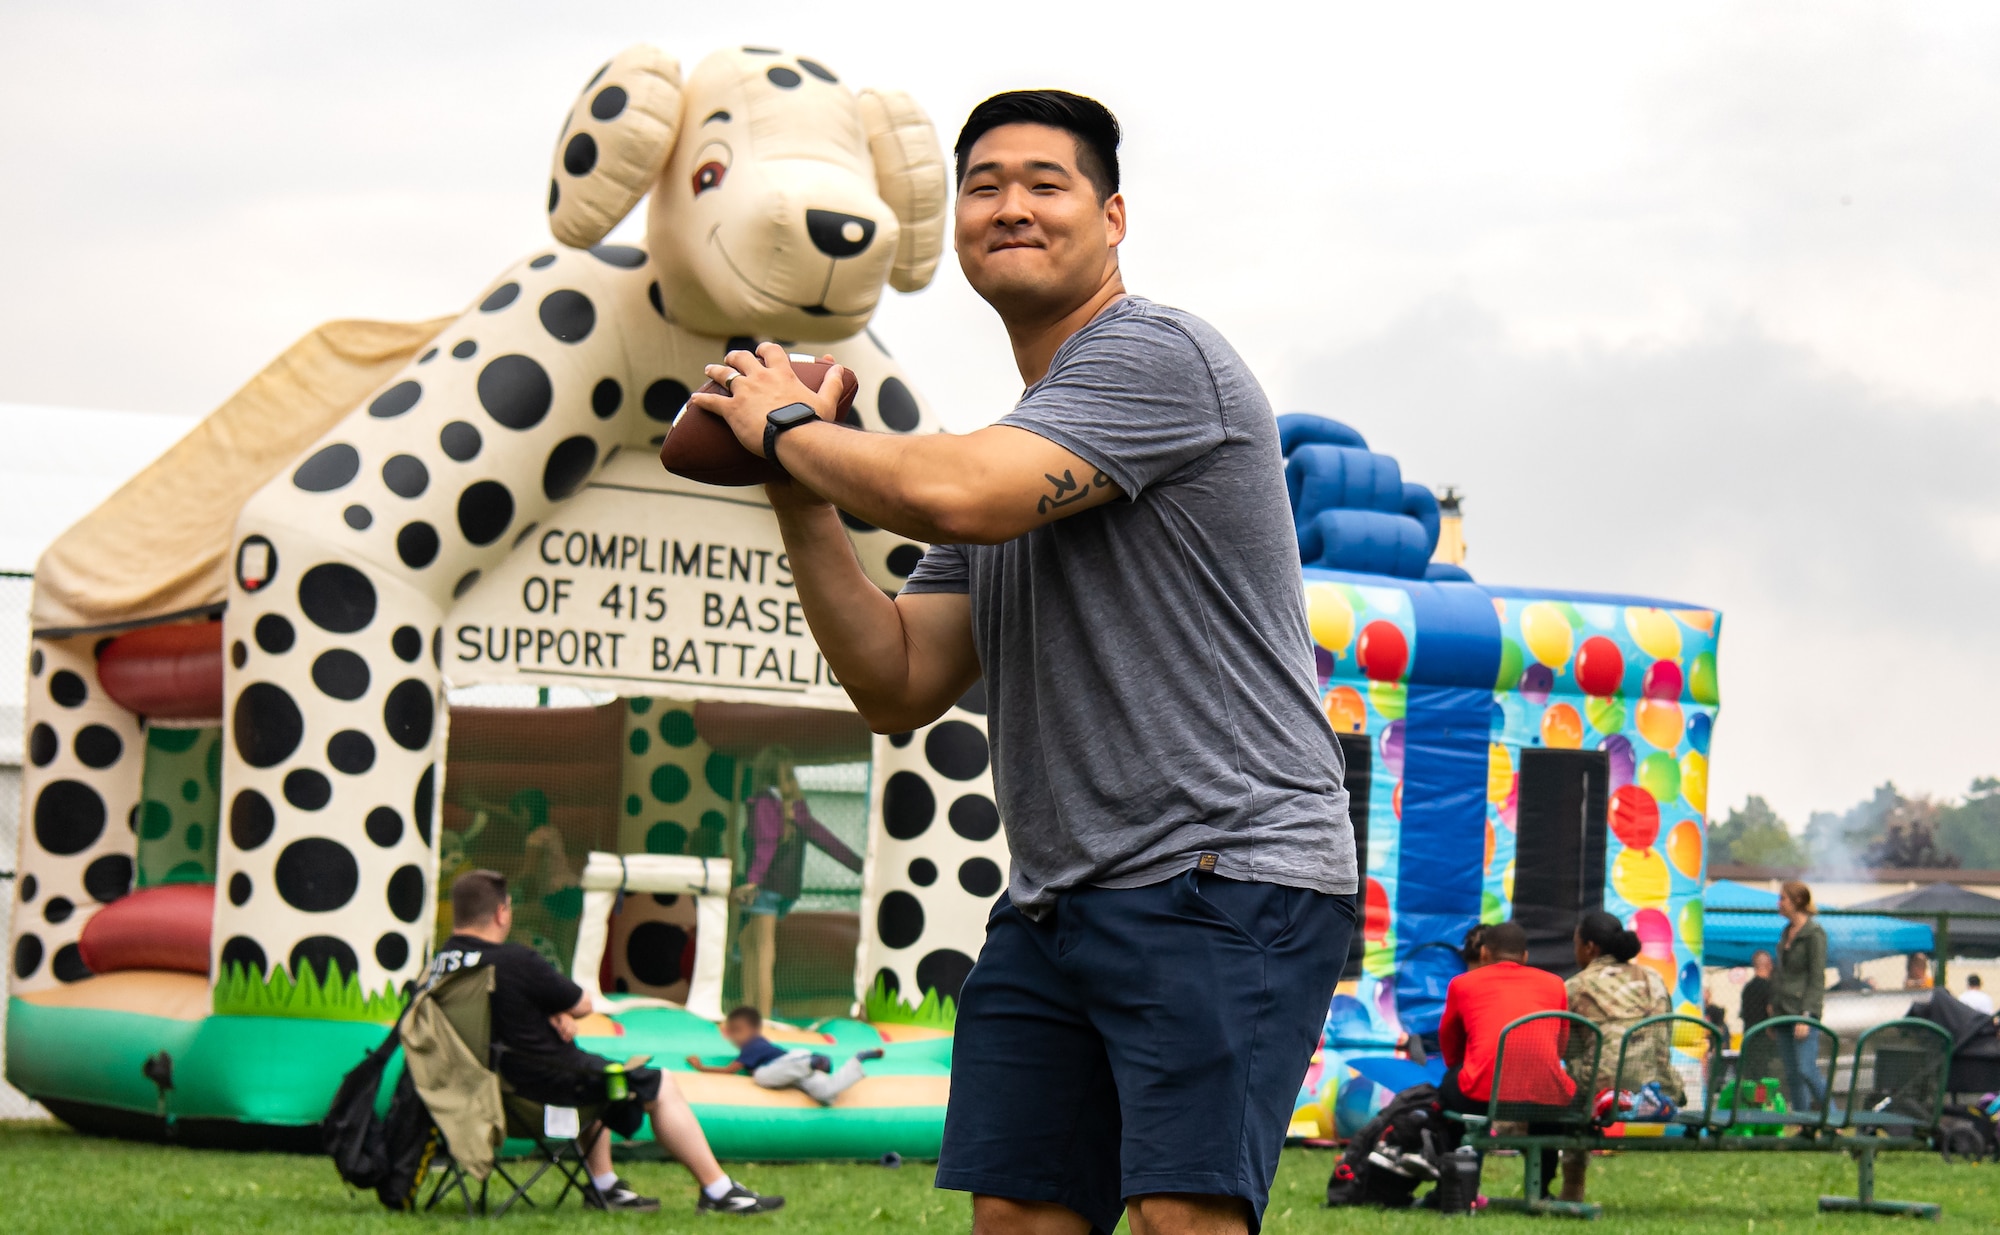 U.S. Air Force Maj. Jonathan Han, 435th Air Ground Operations Wing  Plans and Programs chief, plays football with friends and family during a 435th AGOW Family Fun Event at Ramstein Air Base, Germany, Aug. 18, 2022. Airmen from across the wing were able to enjoy a day of food and fellowship with their peers. (U.S. Air Force photo by Airman 1st Class Jared Lovett)